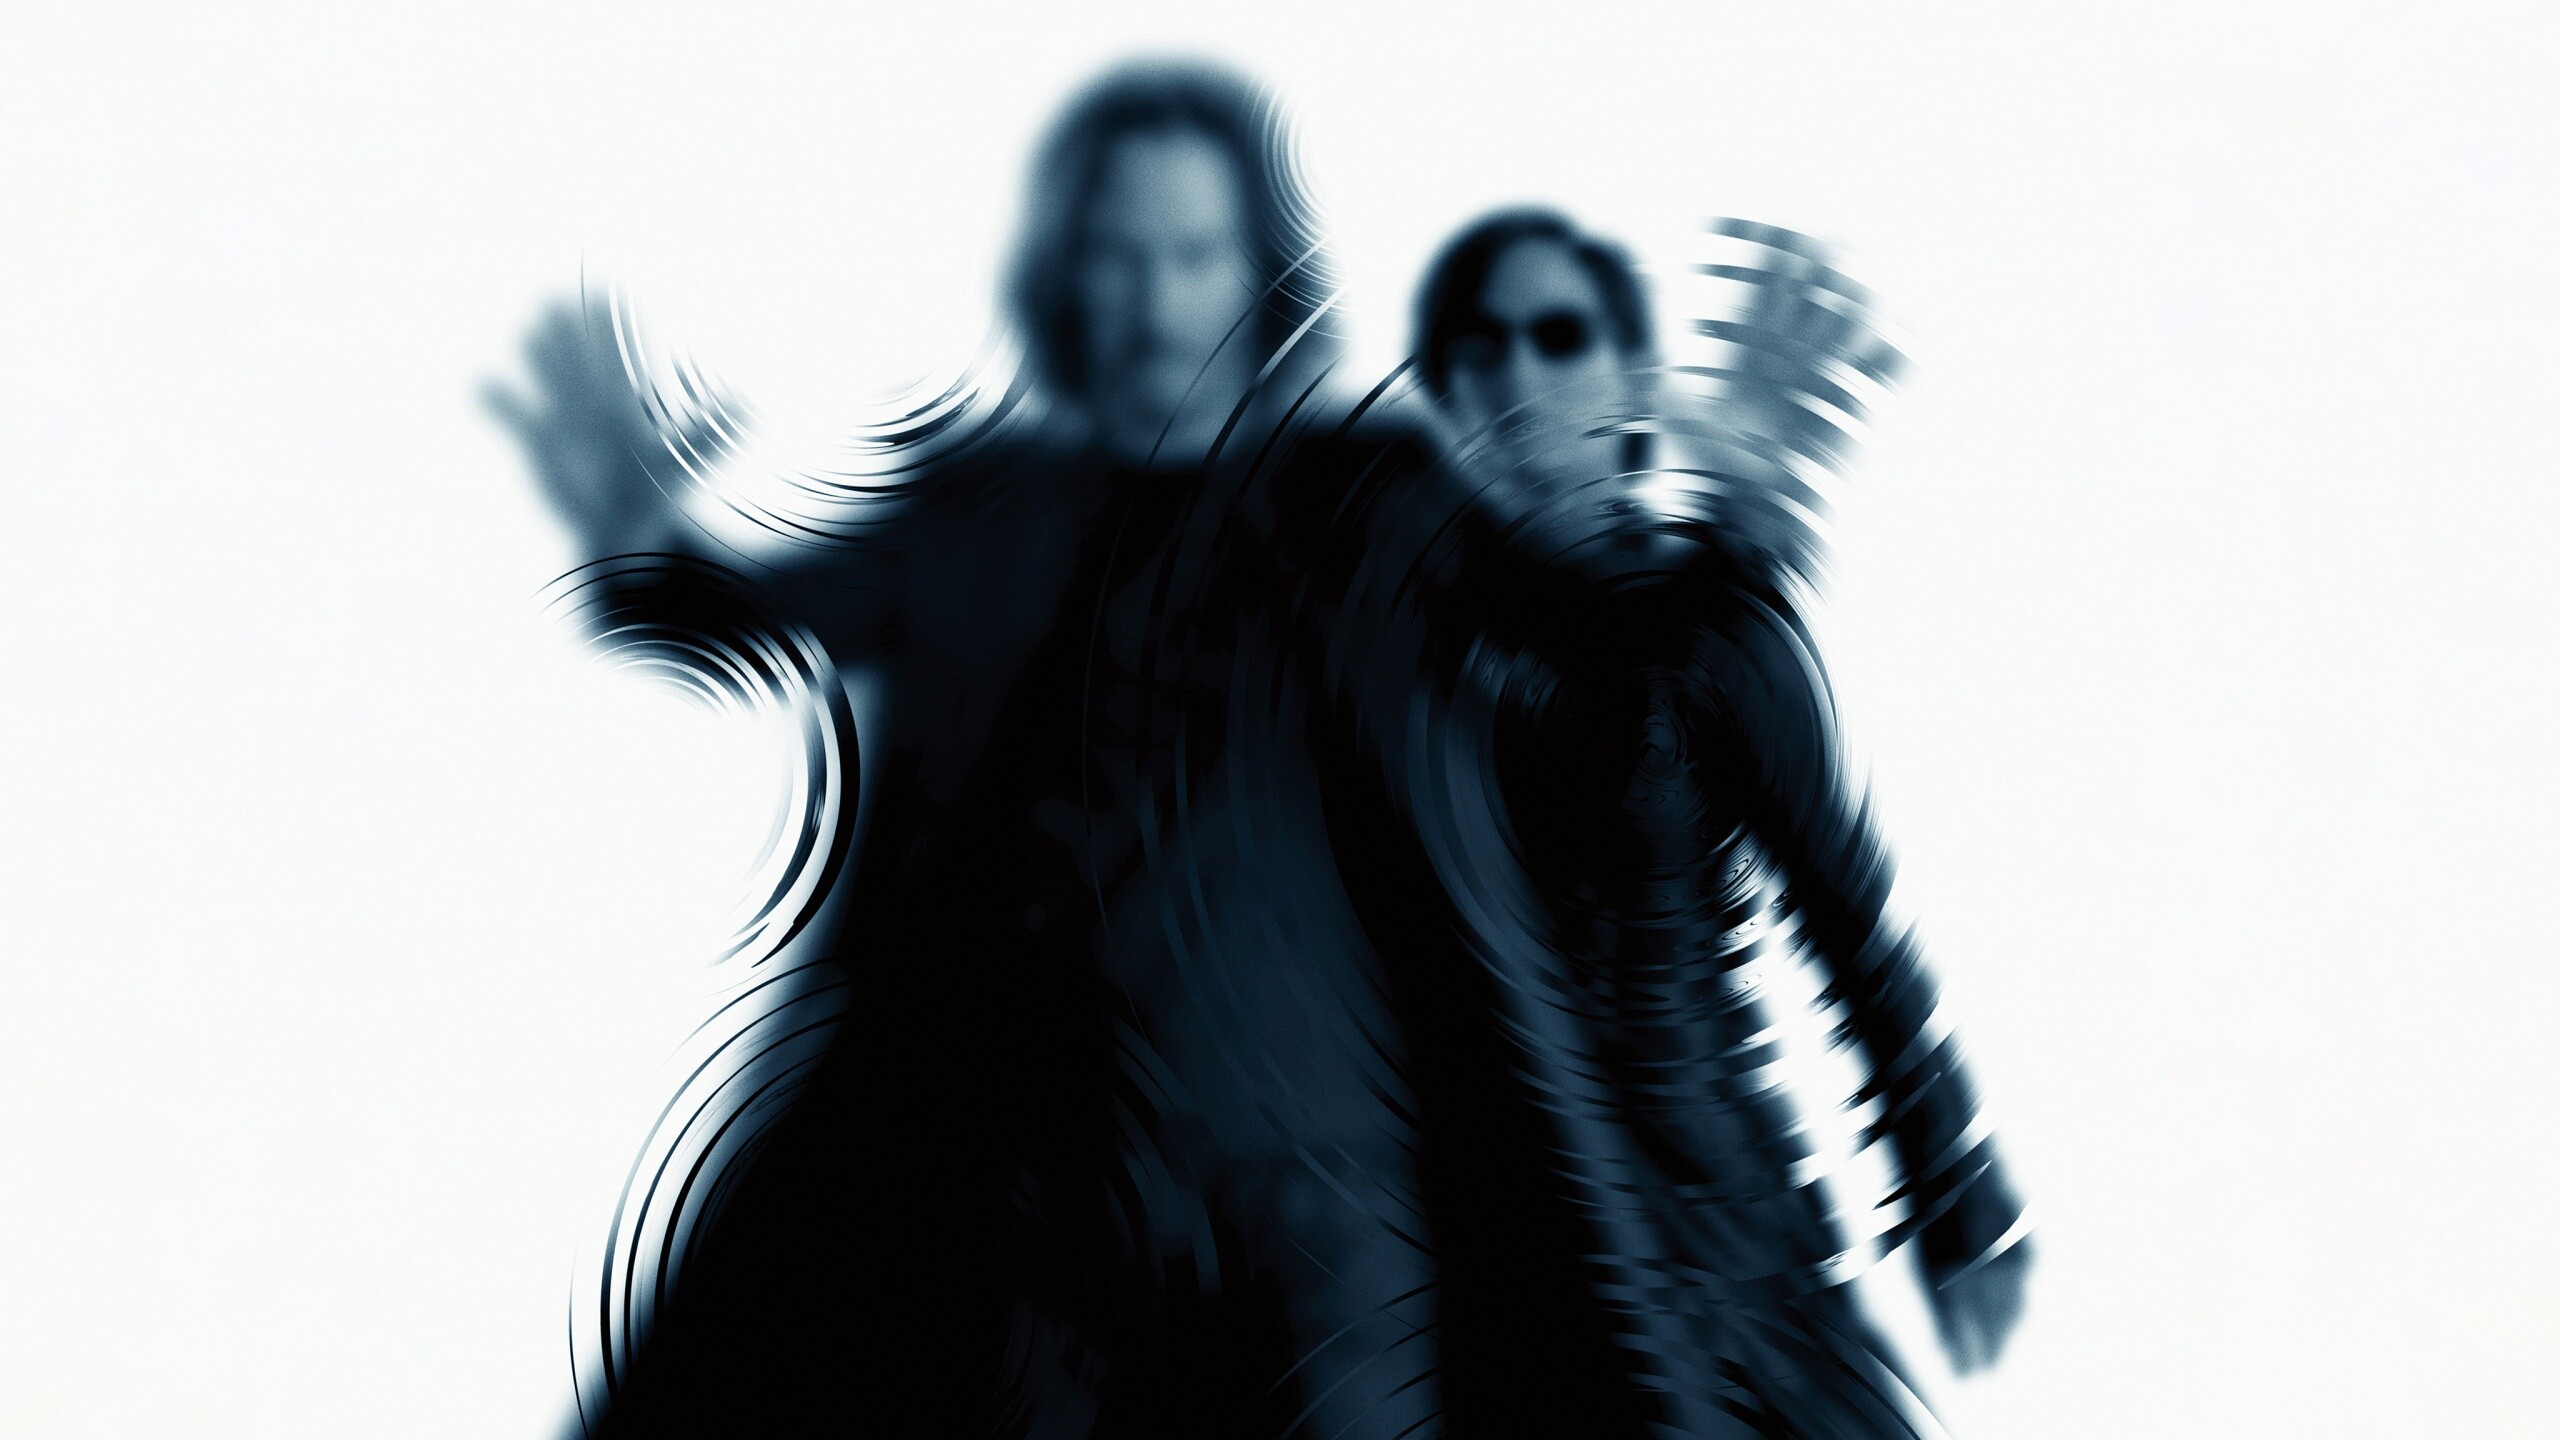 The Matrix Resurrections: Keanu Reeves, Carrie-Anne Moss, Neo, Trinity, 2021 movie. 2560x1440 HD Background.